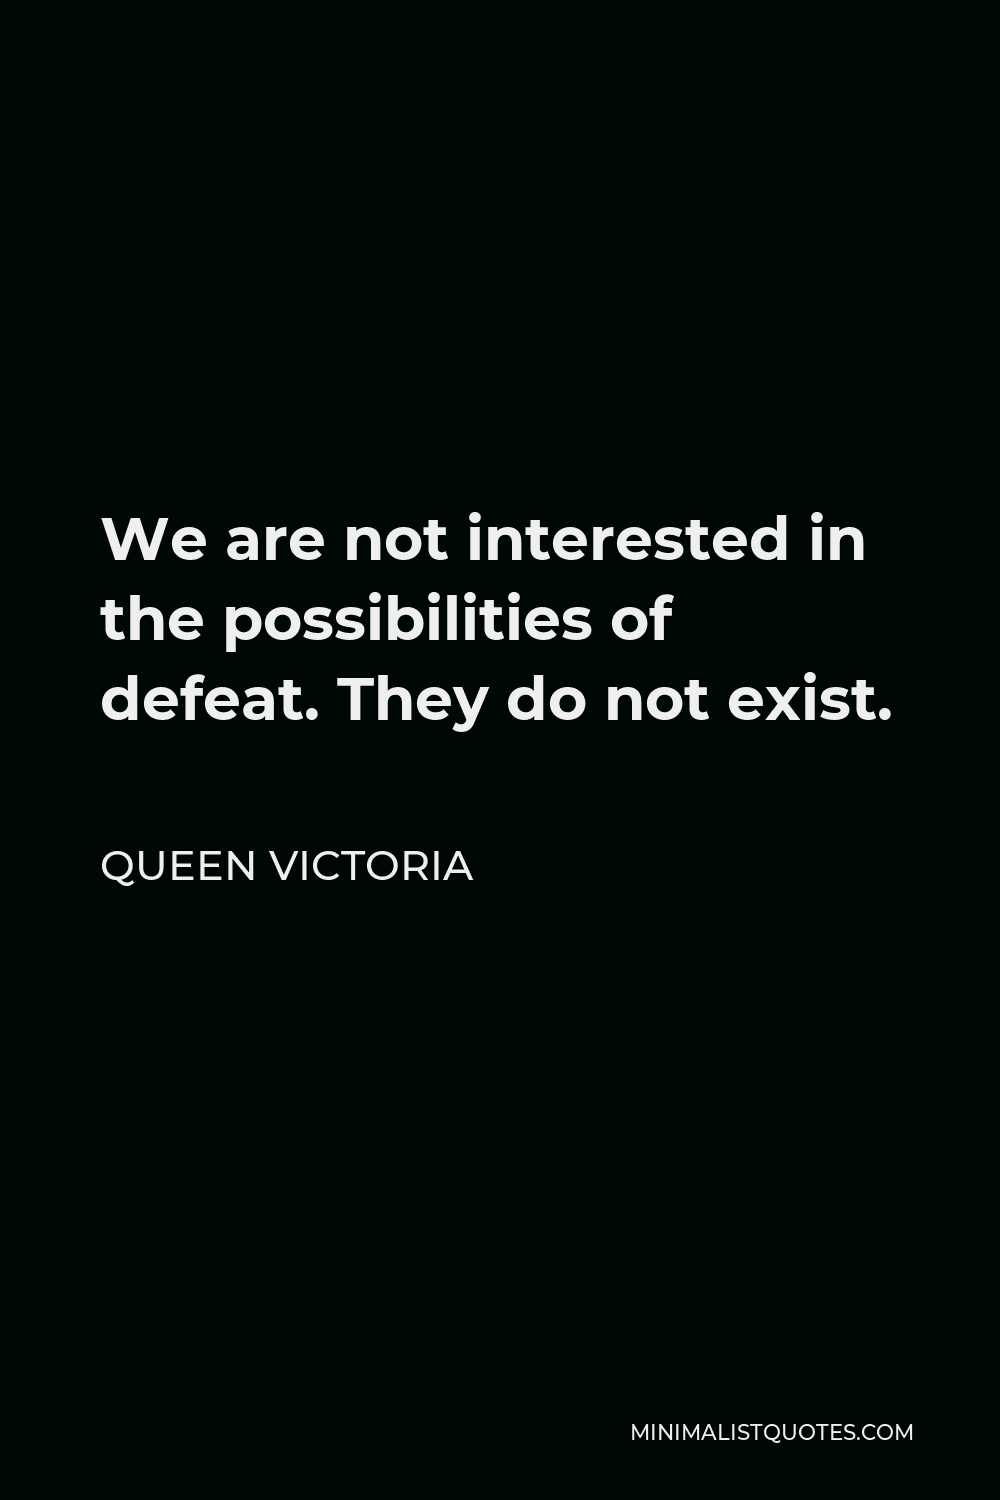 Queen Victoria Quote - We are not interested in the possibilities of defeat. They do not exist.